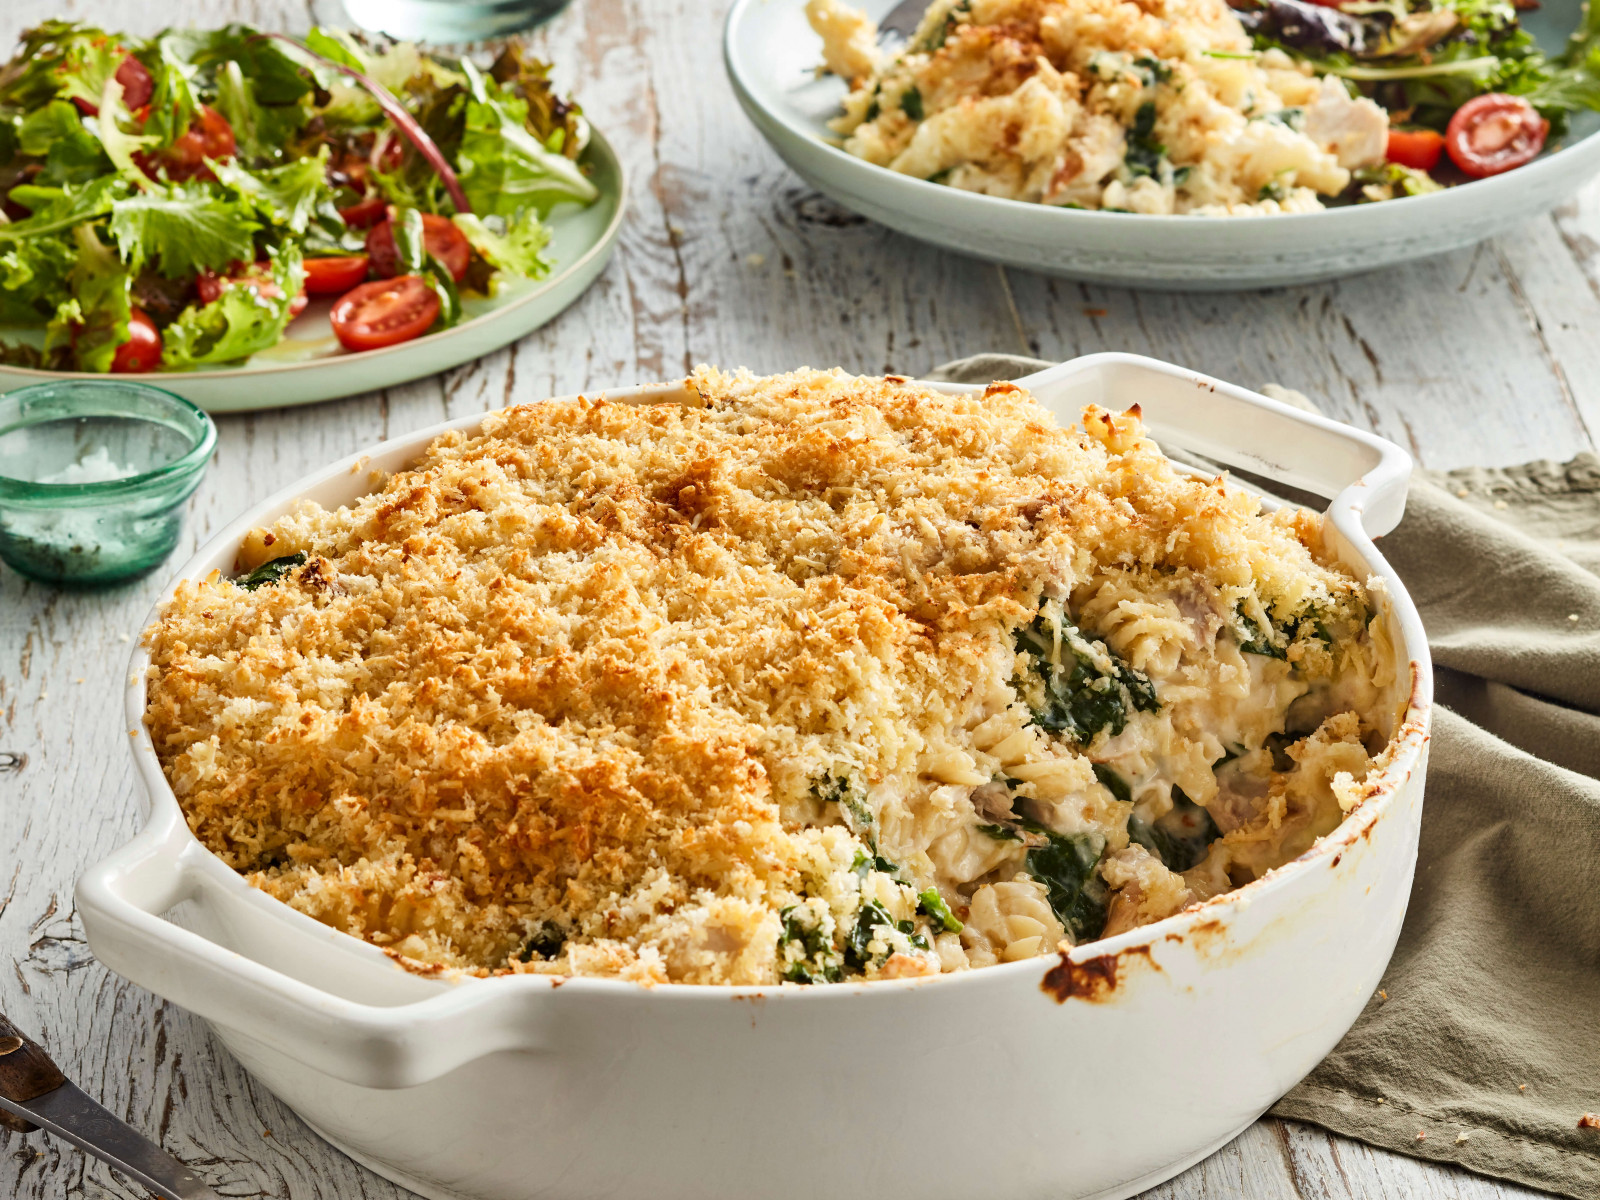 Chicken and Spinach Pasta Bake with Parmesan Crumbs Recipe | myfoodbook